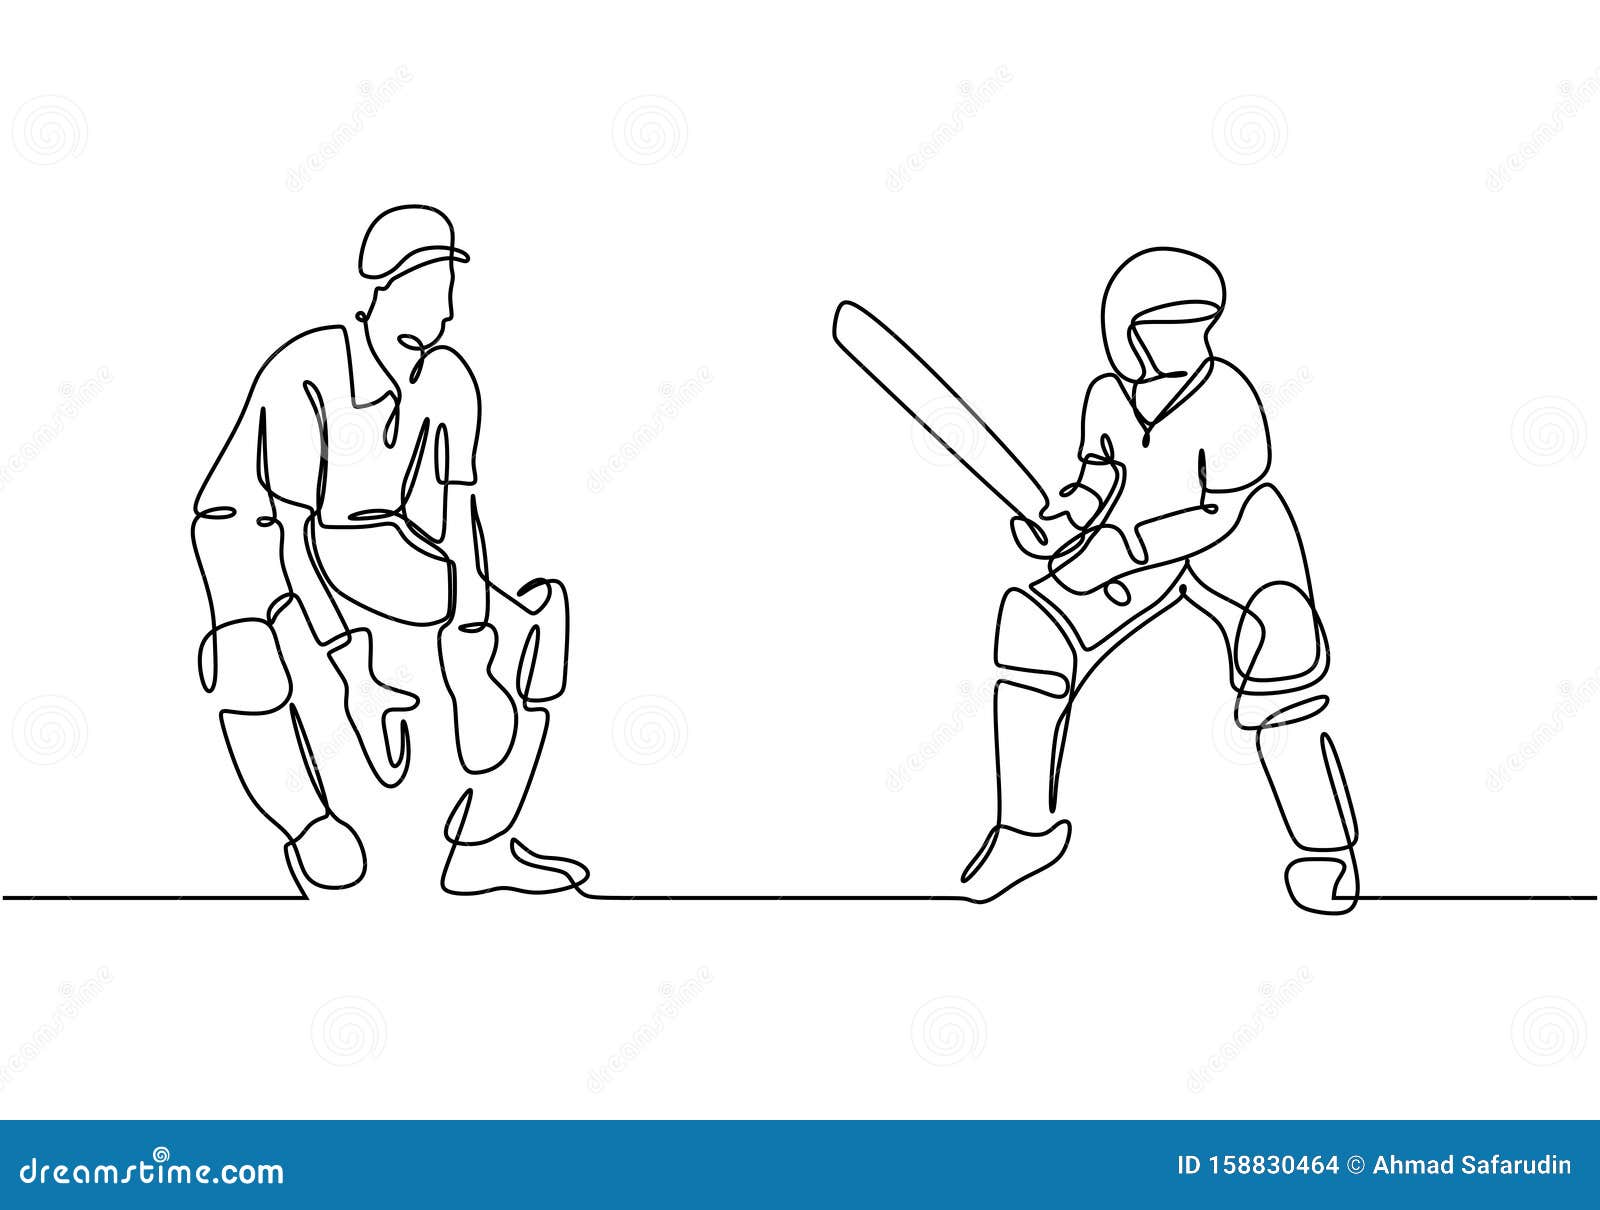 Concept Of Batsman Playing Cricket - Championship, Line Art Design Royalty  Free SVG, Cliparts, Vectors, and Stock Illustration. Image 126013159.